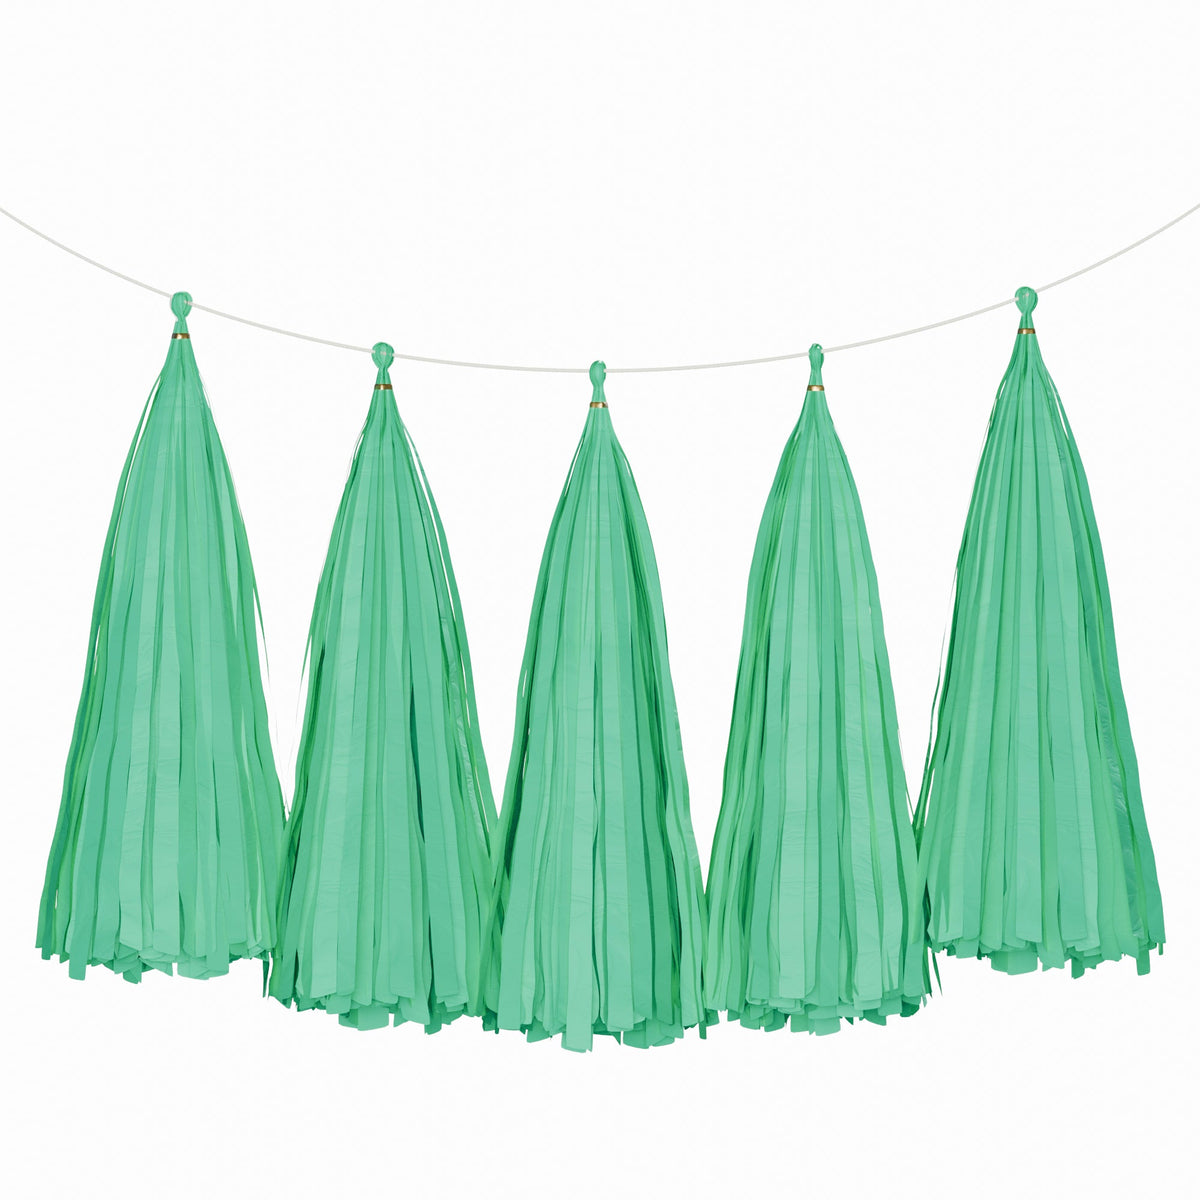 Weifang Mayshine Imp&exp co Decorations Green Tassel Garland, 5 Count 810064197253